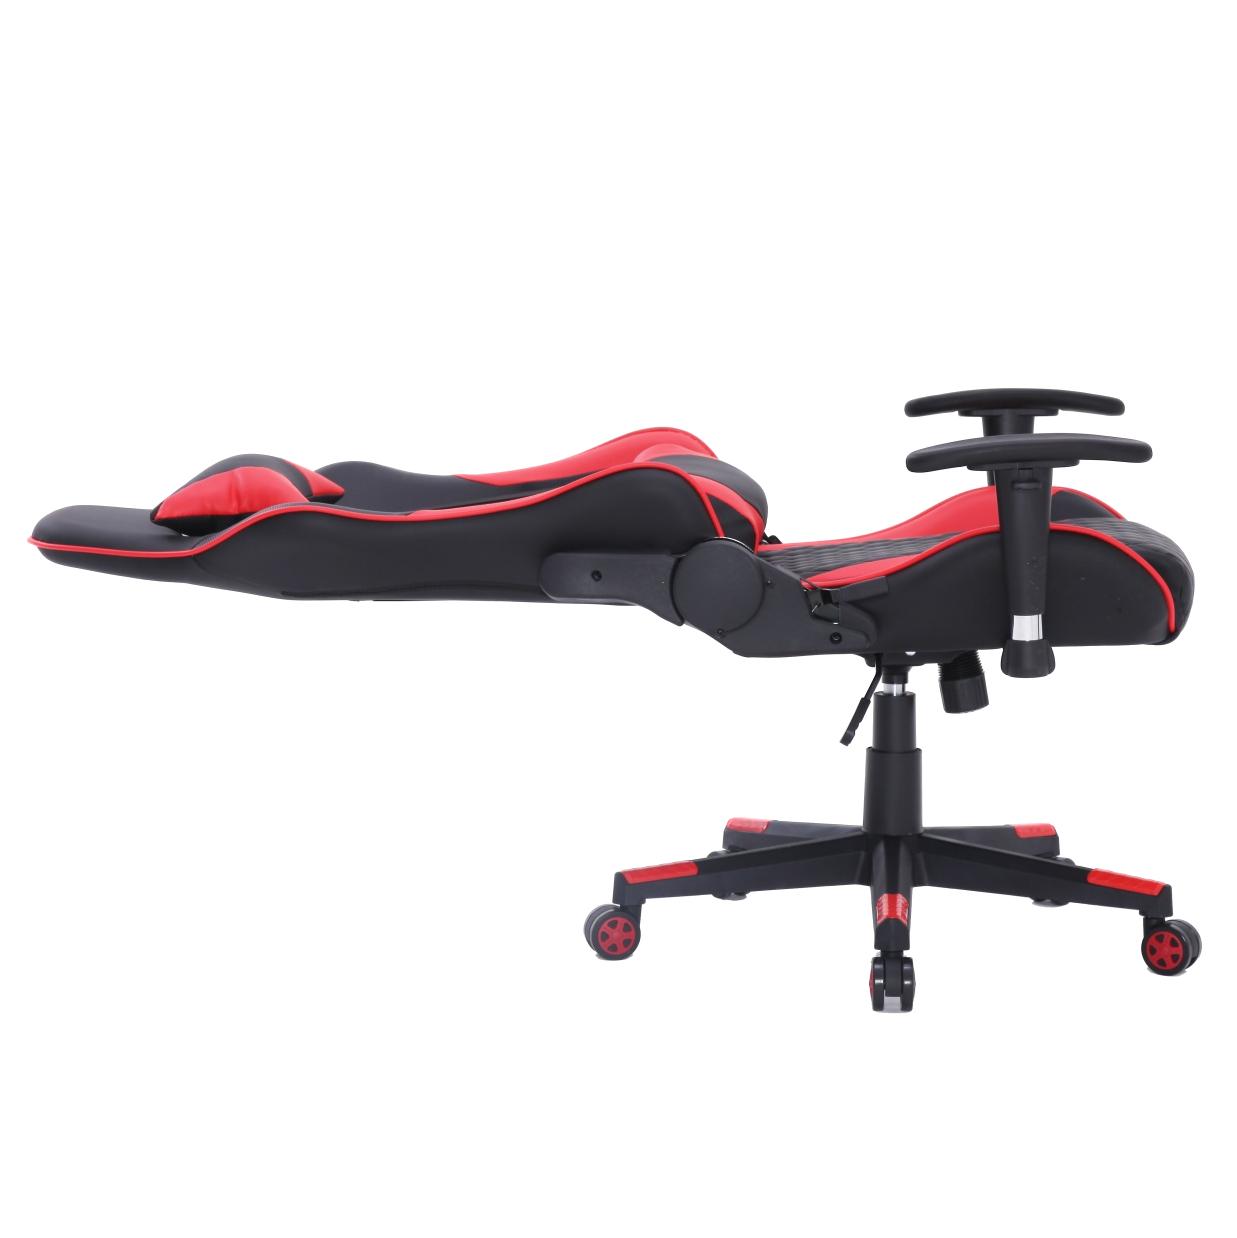 ViscoLogic MAZON  Racing Style Ergonomic Backrest With Pillows Recliner Swivel  and Lumbar Support Home OFfice Chair (Black & Red)